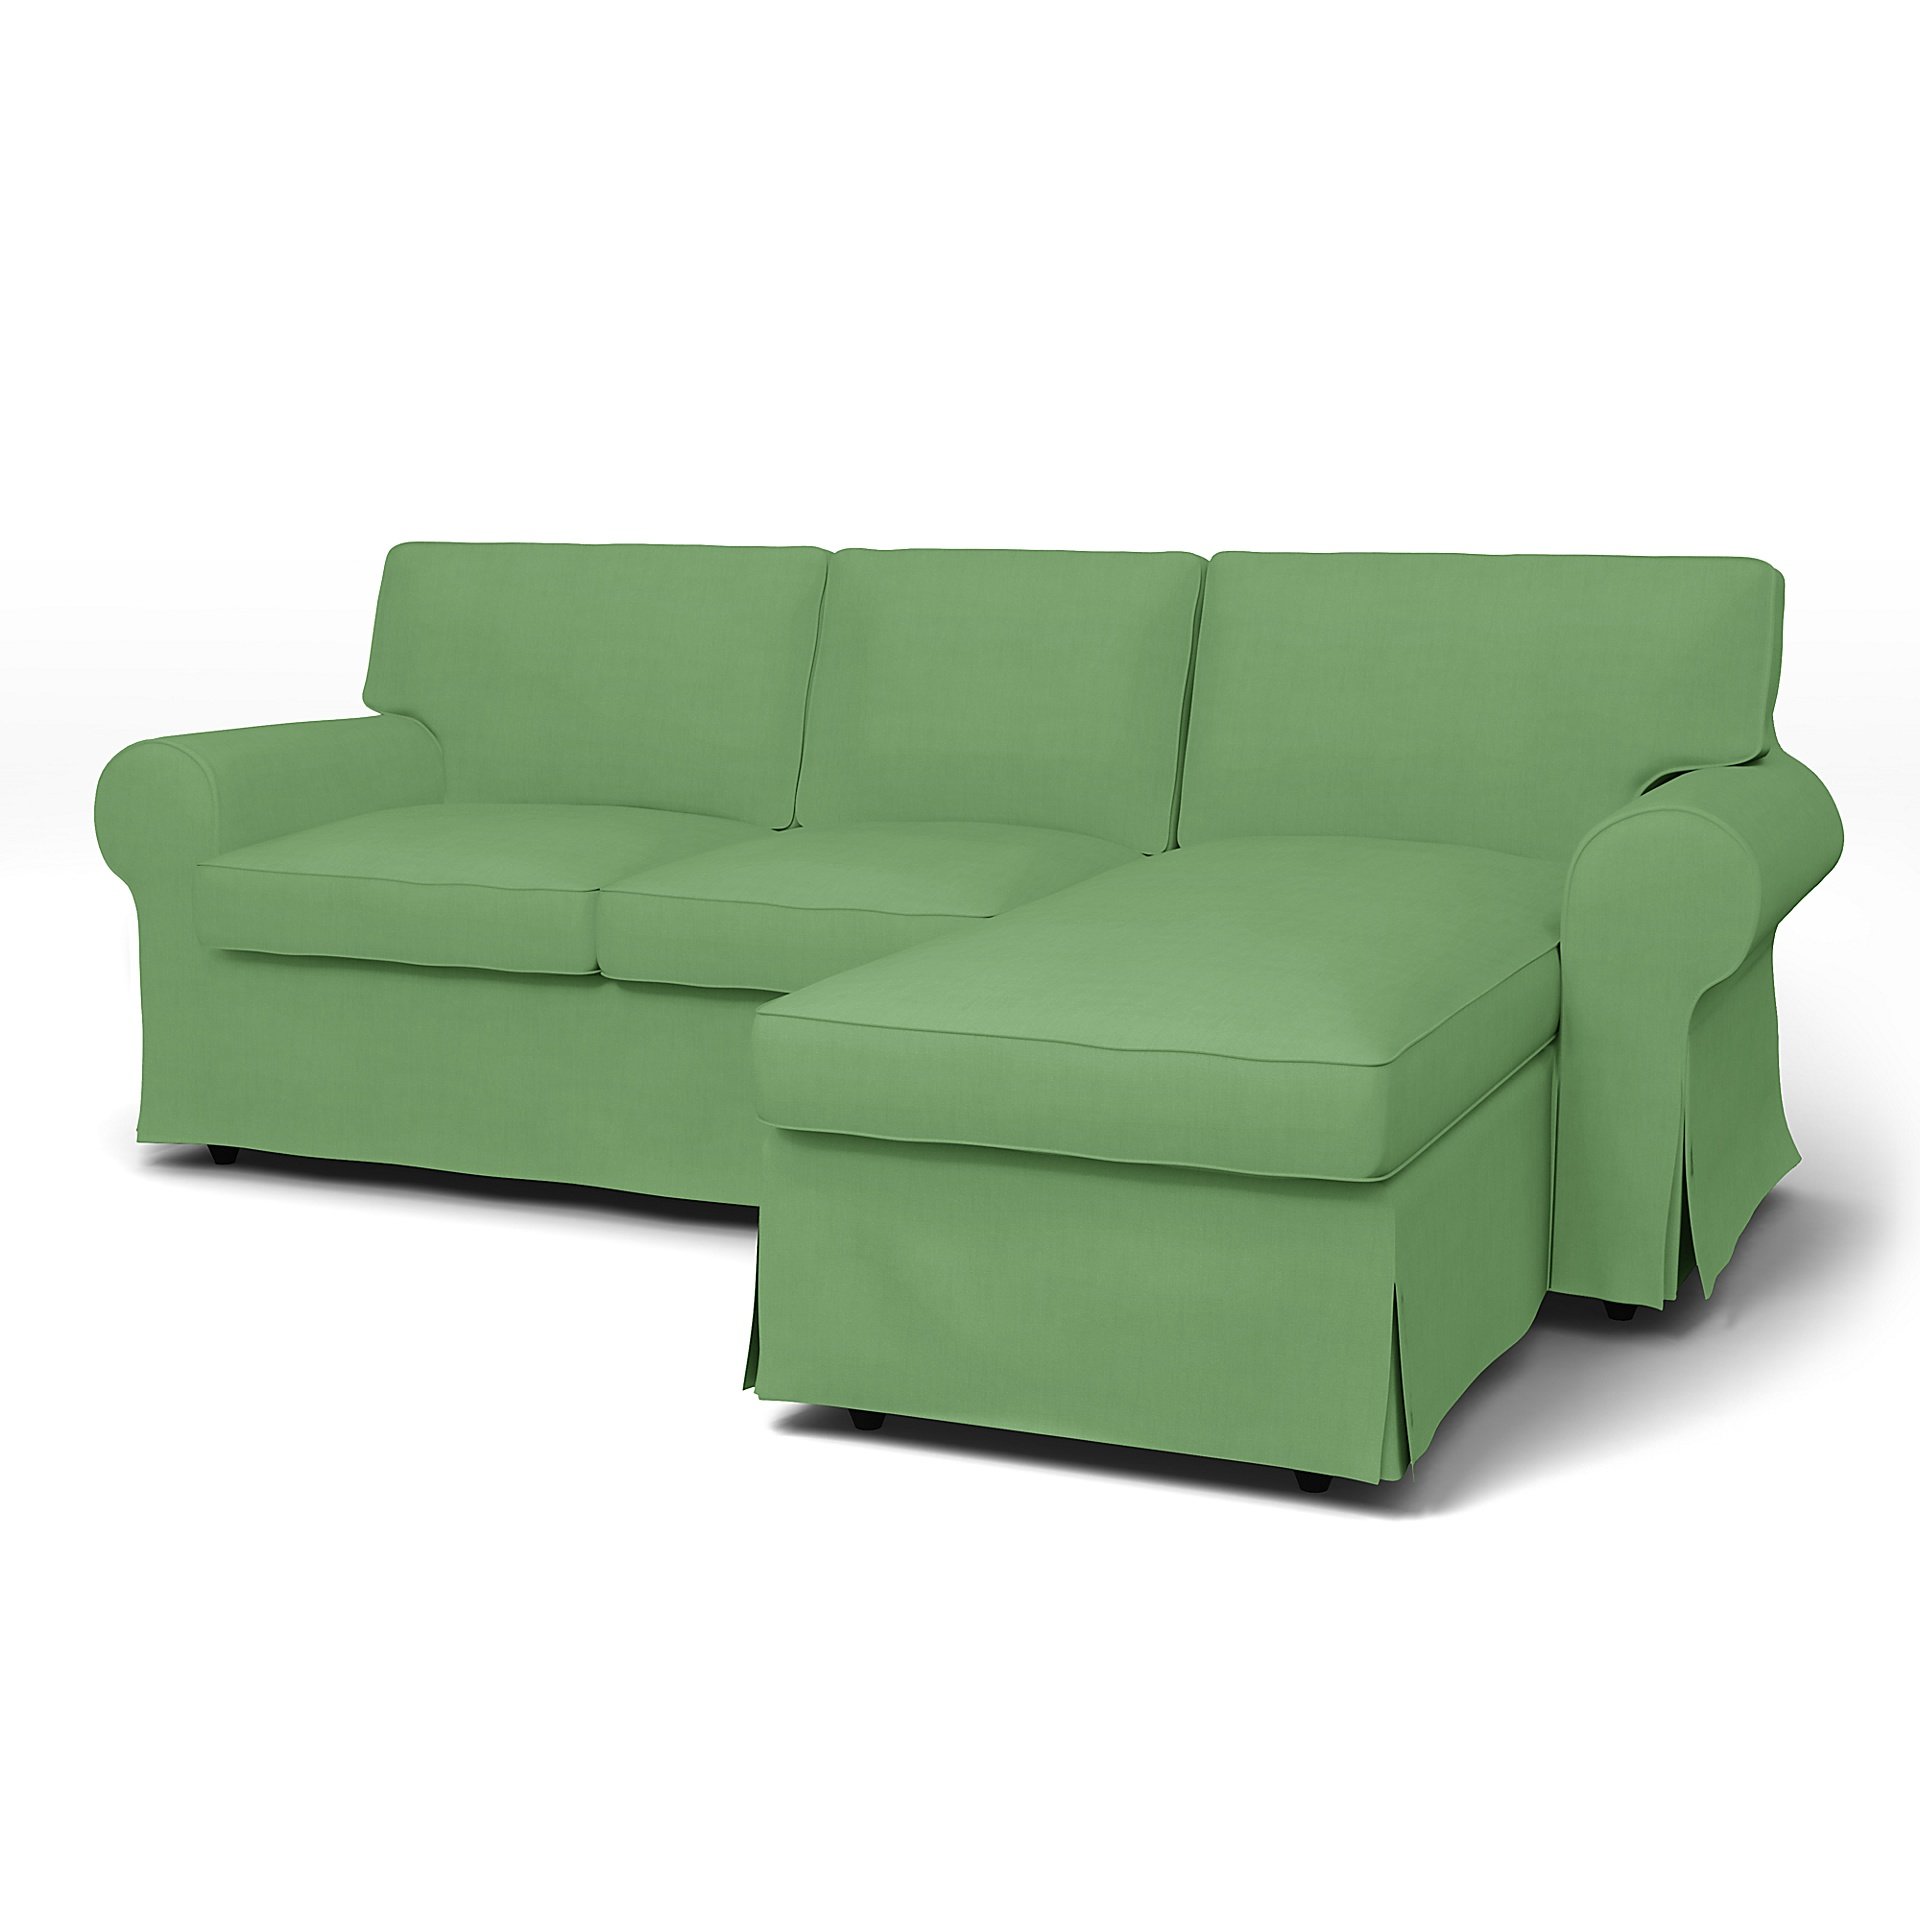 IKEA - Ektorp 3 Seater Sofa with Chaise Cover, Apple Green, Linen - Bemz